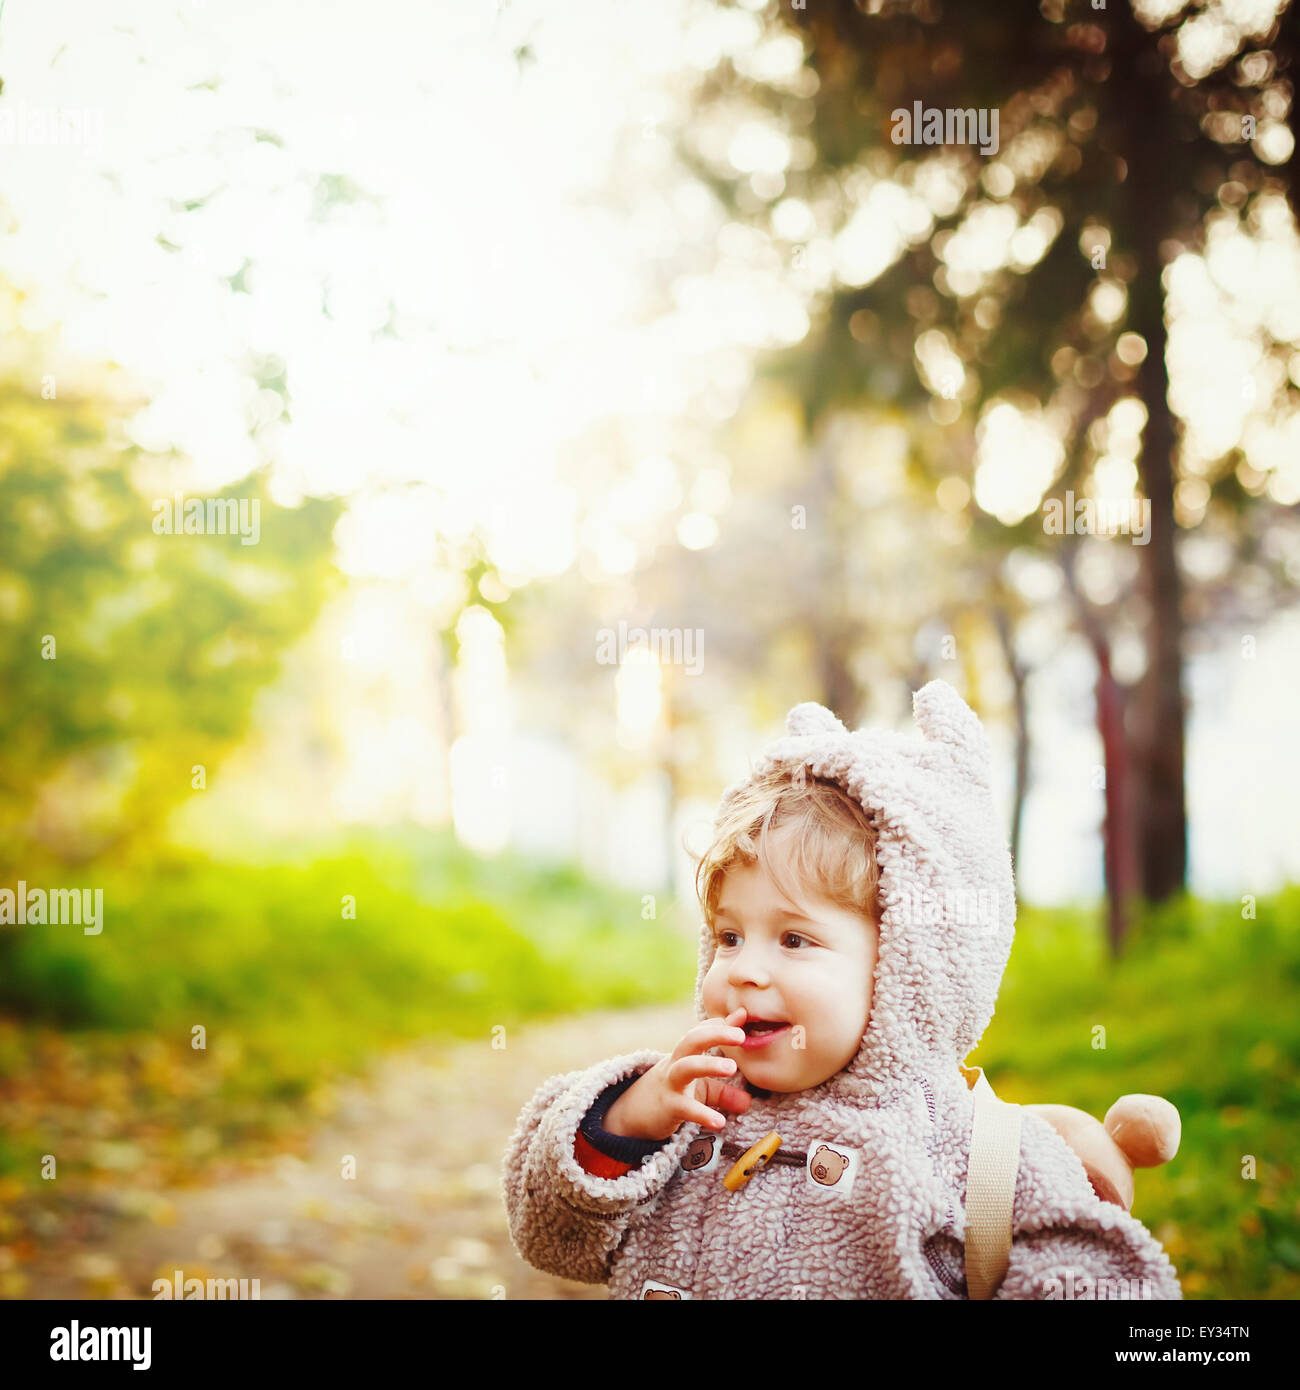 Funny Shy Little 2 year old Boy Giggling in the Park at the Sunset. Happy Childhood Concept. Space for your Text. Instagram Vint Stock Photo